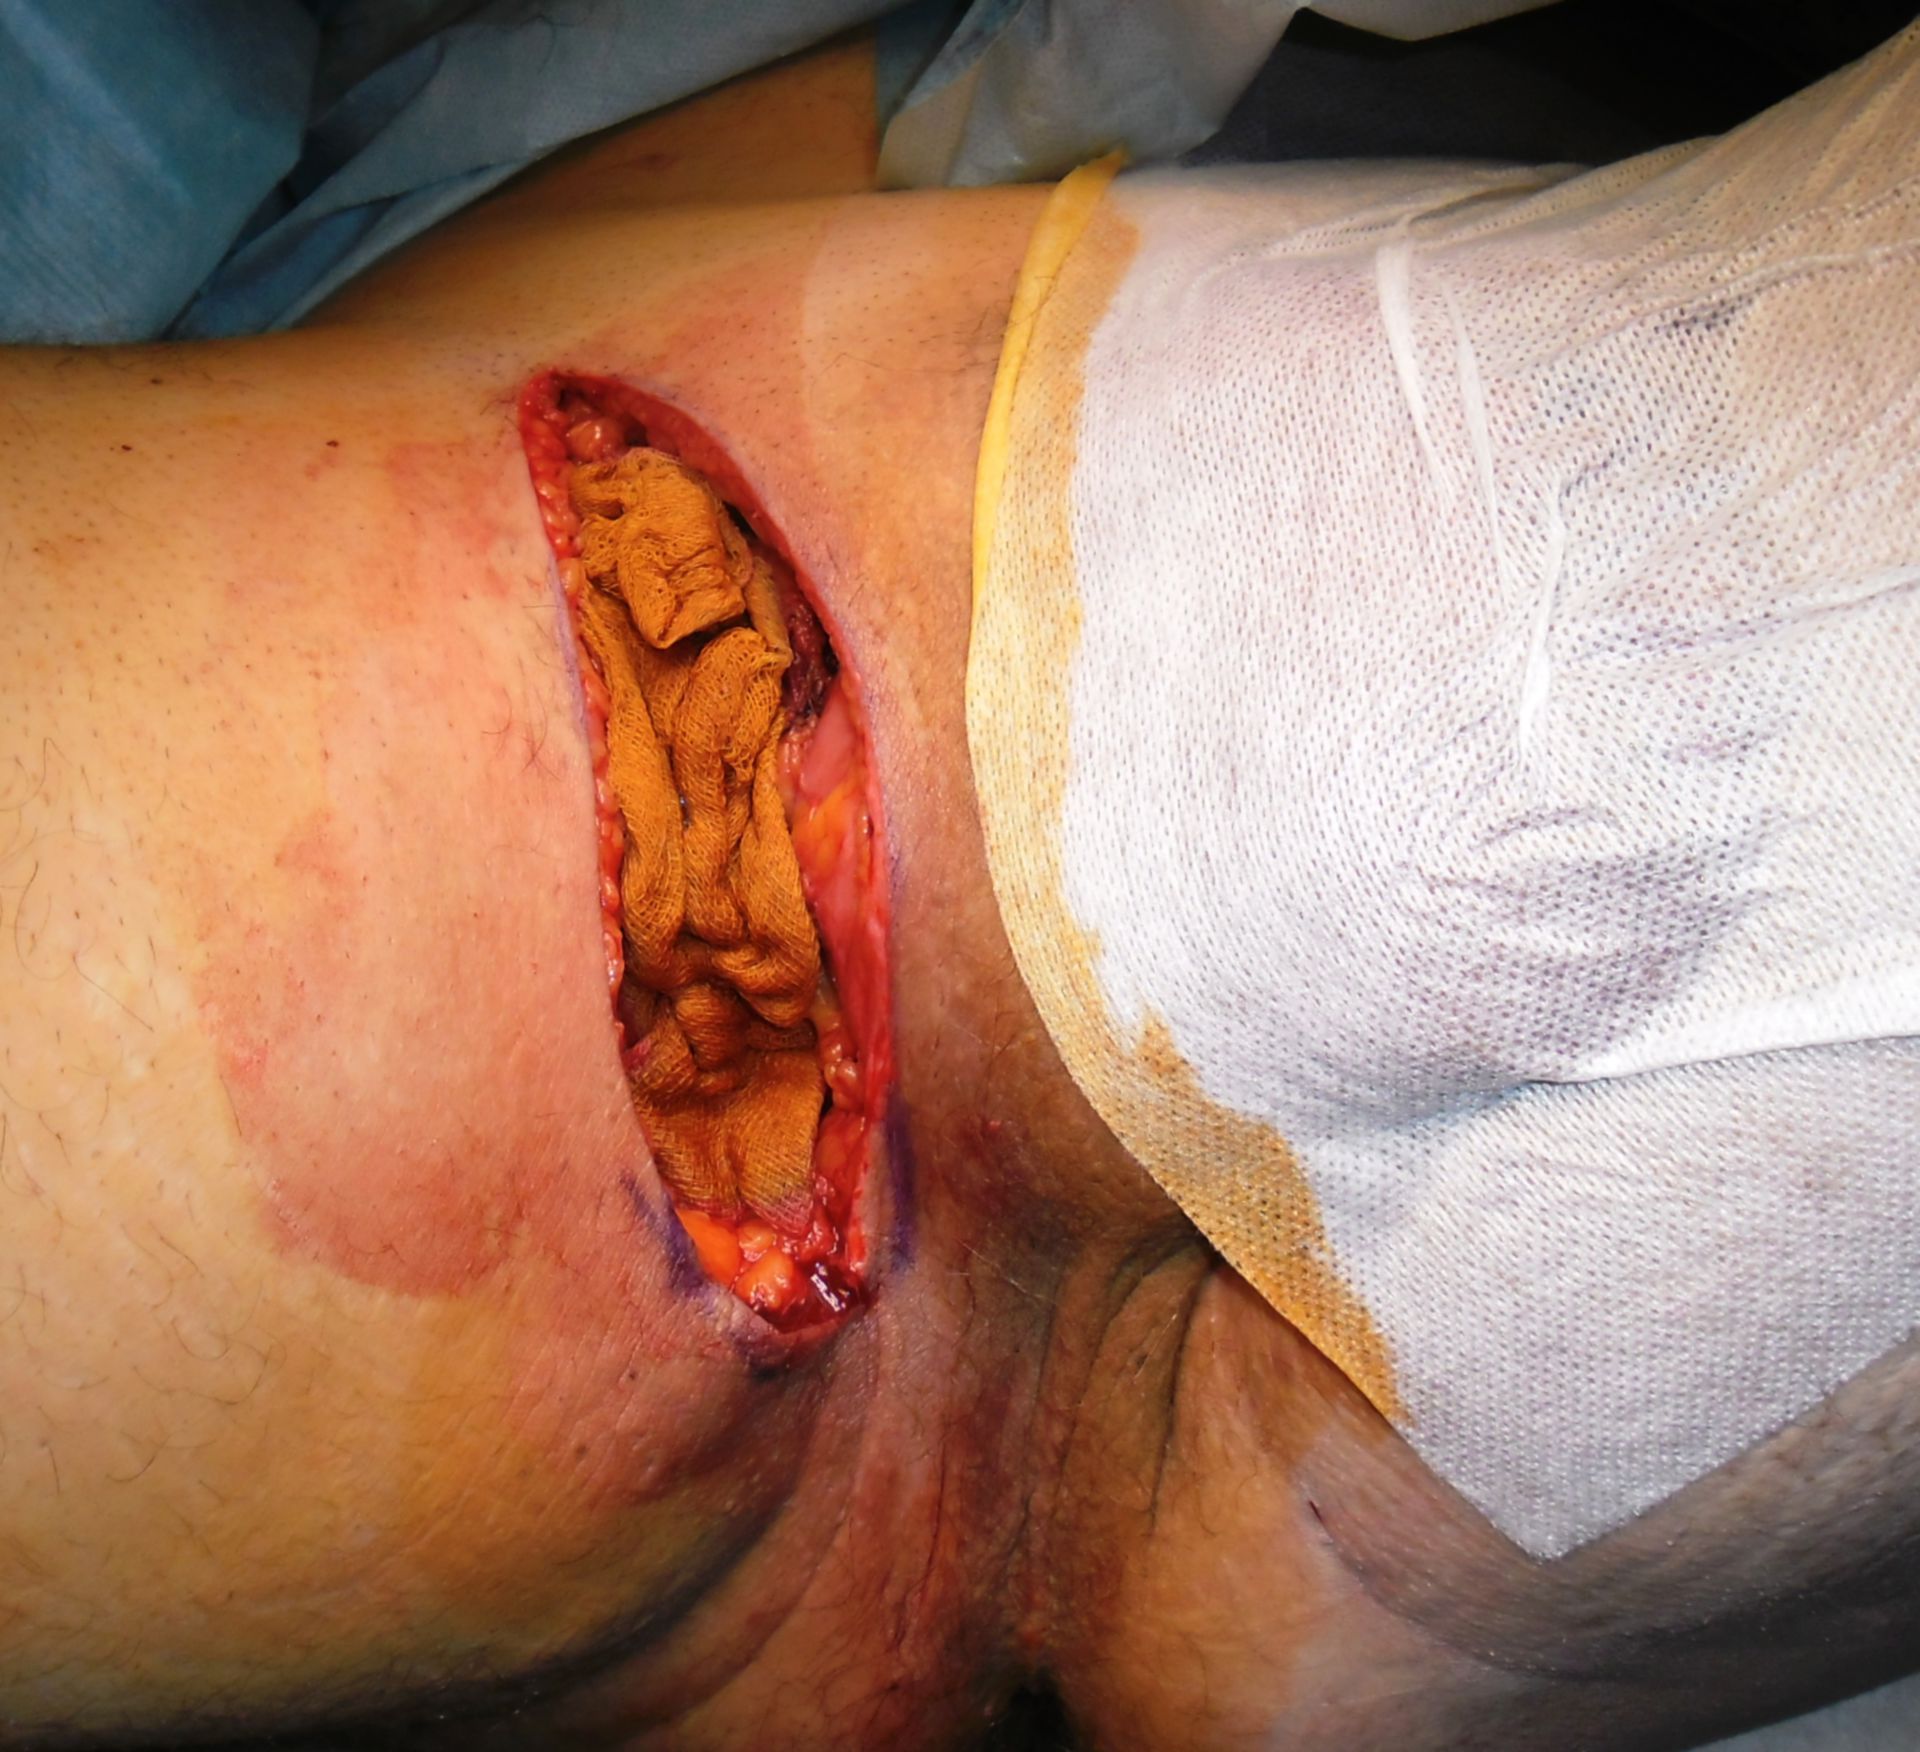 Acne inversa, right groin - open wound treatment